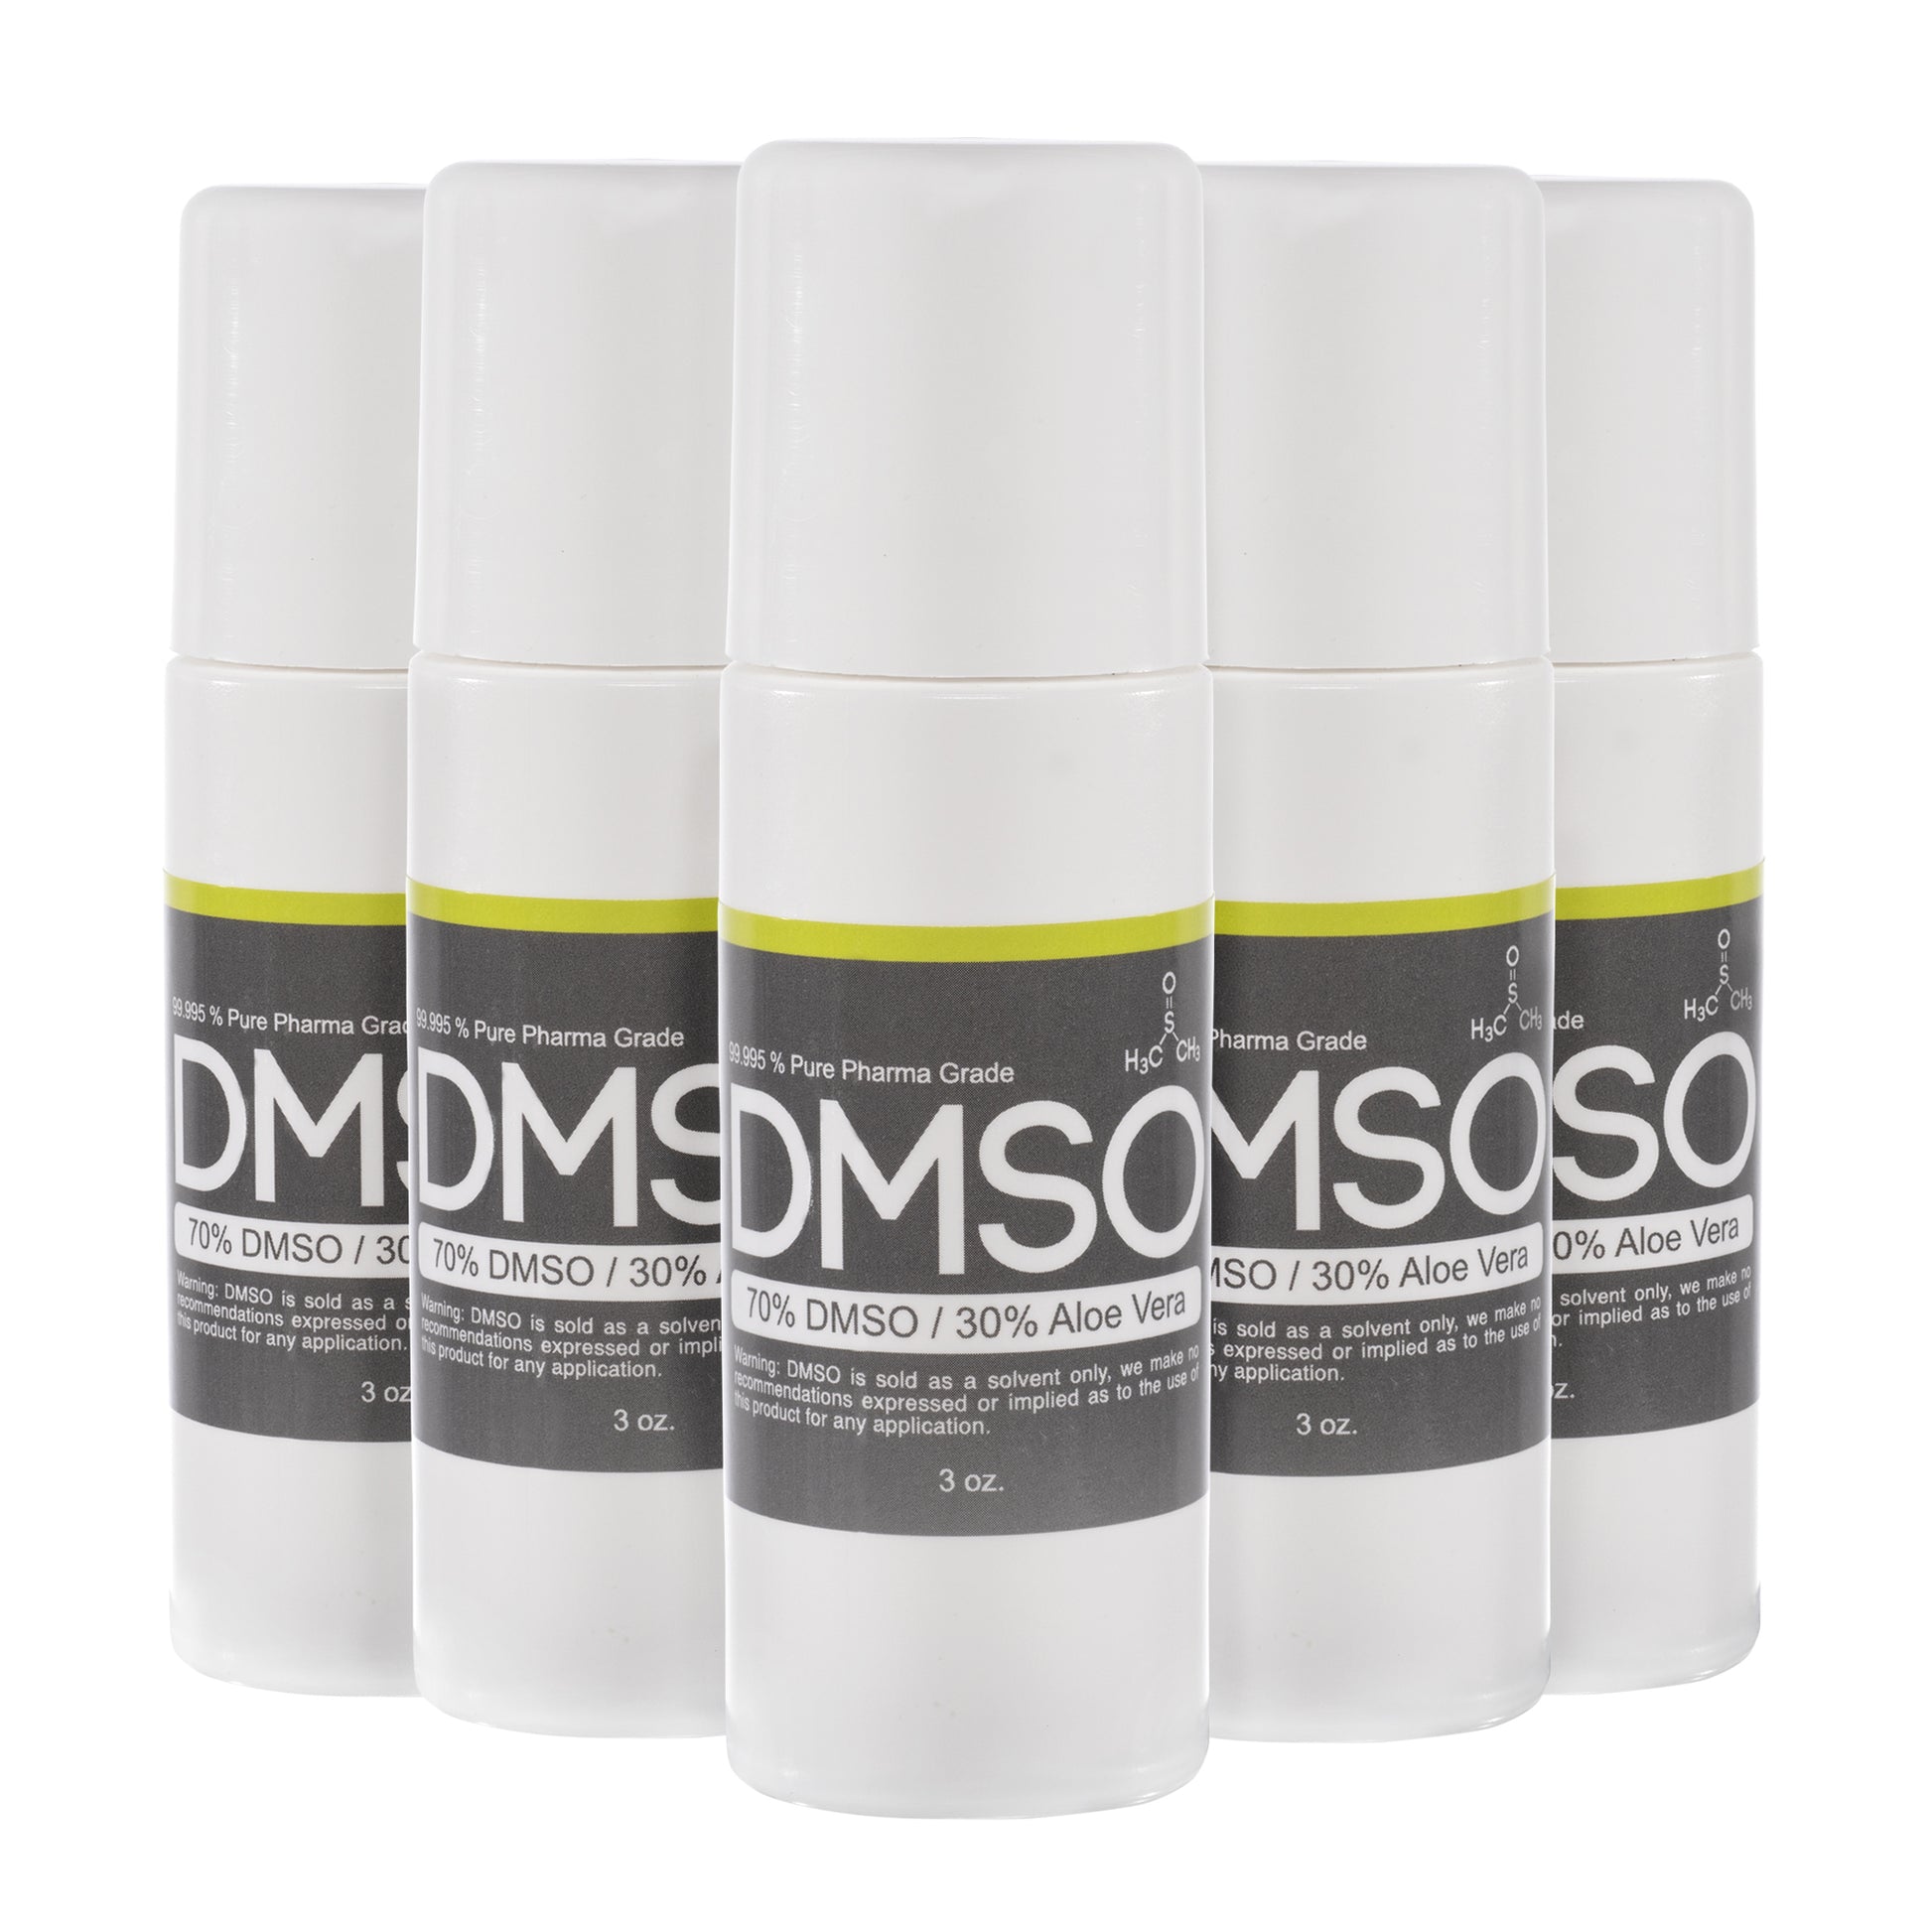 DMSO-roll-on-70-30-aloe-gel-pure-dimethyl-sulfoxide-best-joint-pain-relief-3-oz-5-pack. 5 Small white cylindrical bottles with cap screwed on. Label reads "DMSO 70% DMSO 30% Aloe Vera" 3 oz